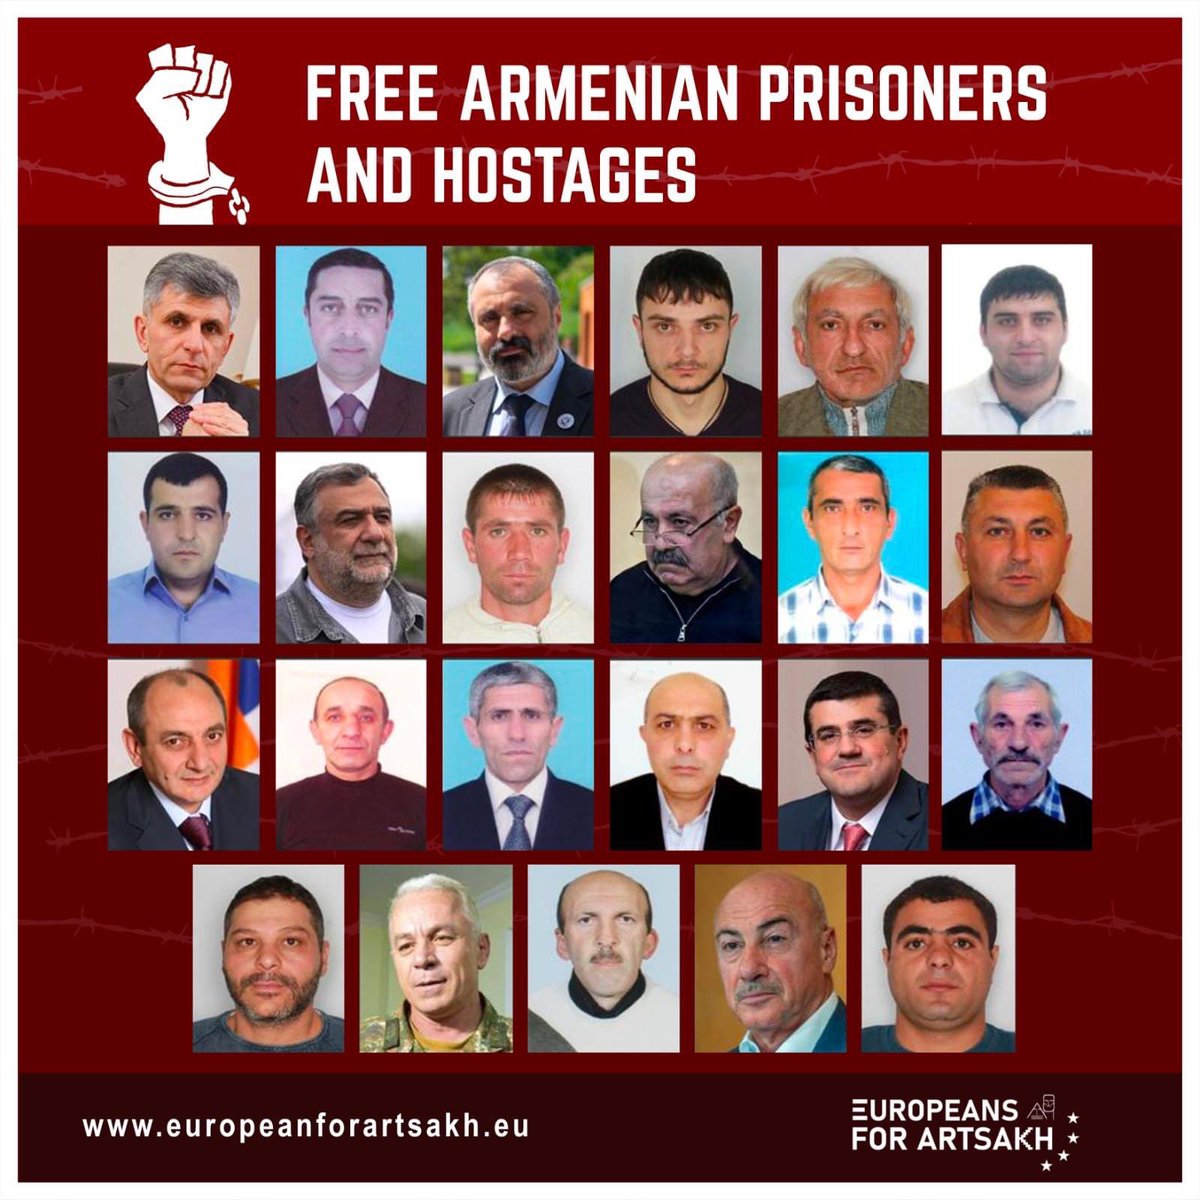 @HikmetHajiyev Unless Azerbaijan frees ALL Armenian hostages, withdraws its troops from Armenia, & stops threatening us, these are just propaganda words.

The only reason Azerbaijan was able to become a host of #COP29 is because they released half of Armenian hostages. 

#FreeArmenianHostages